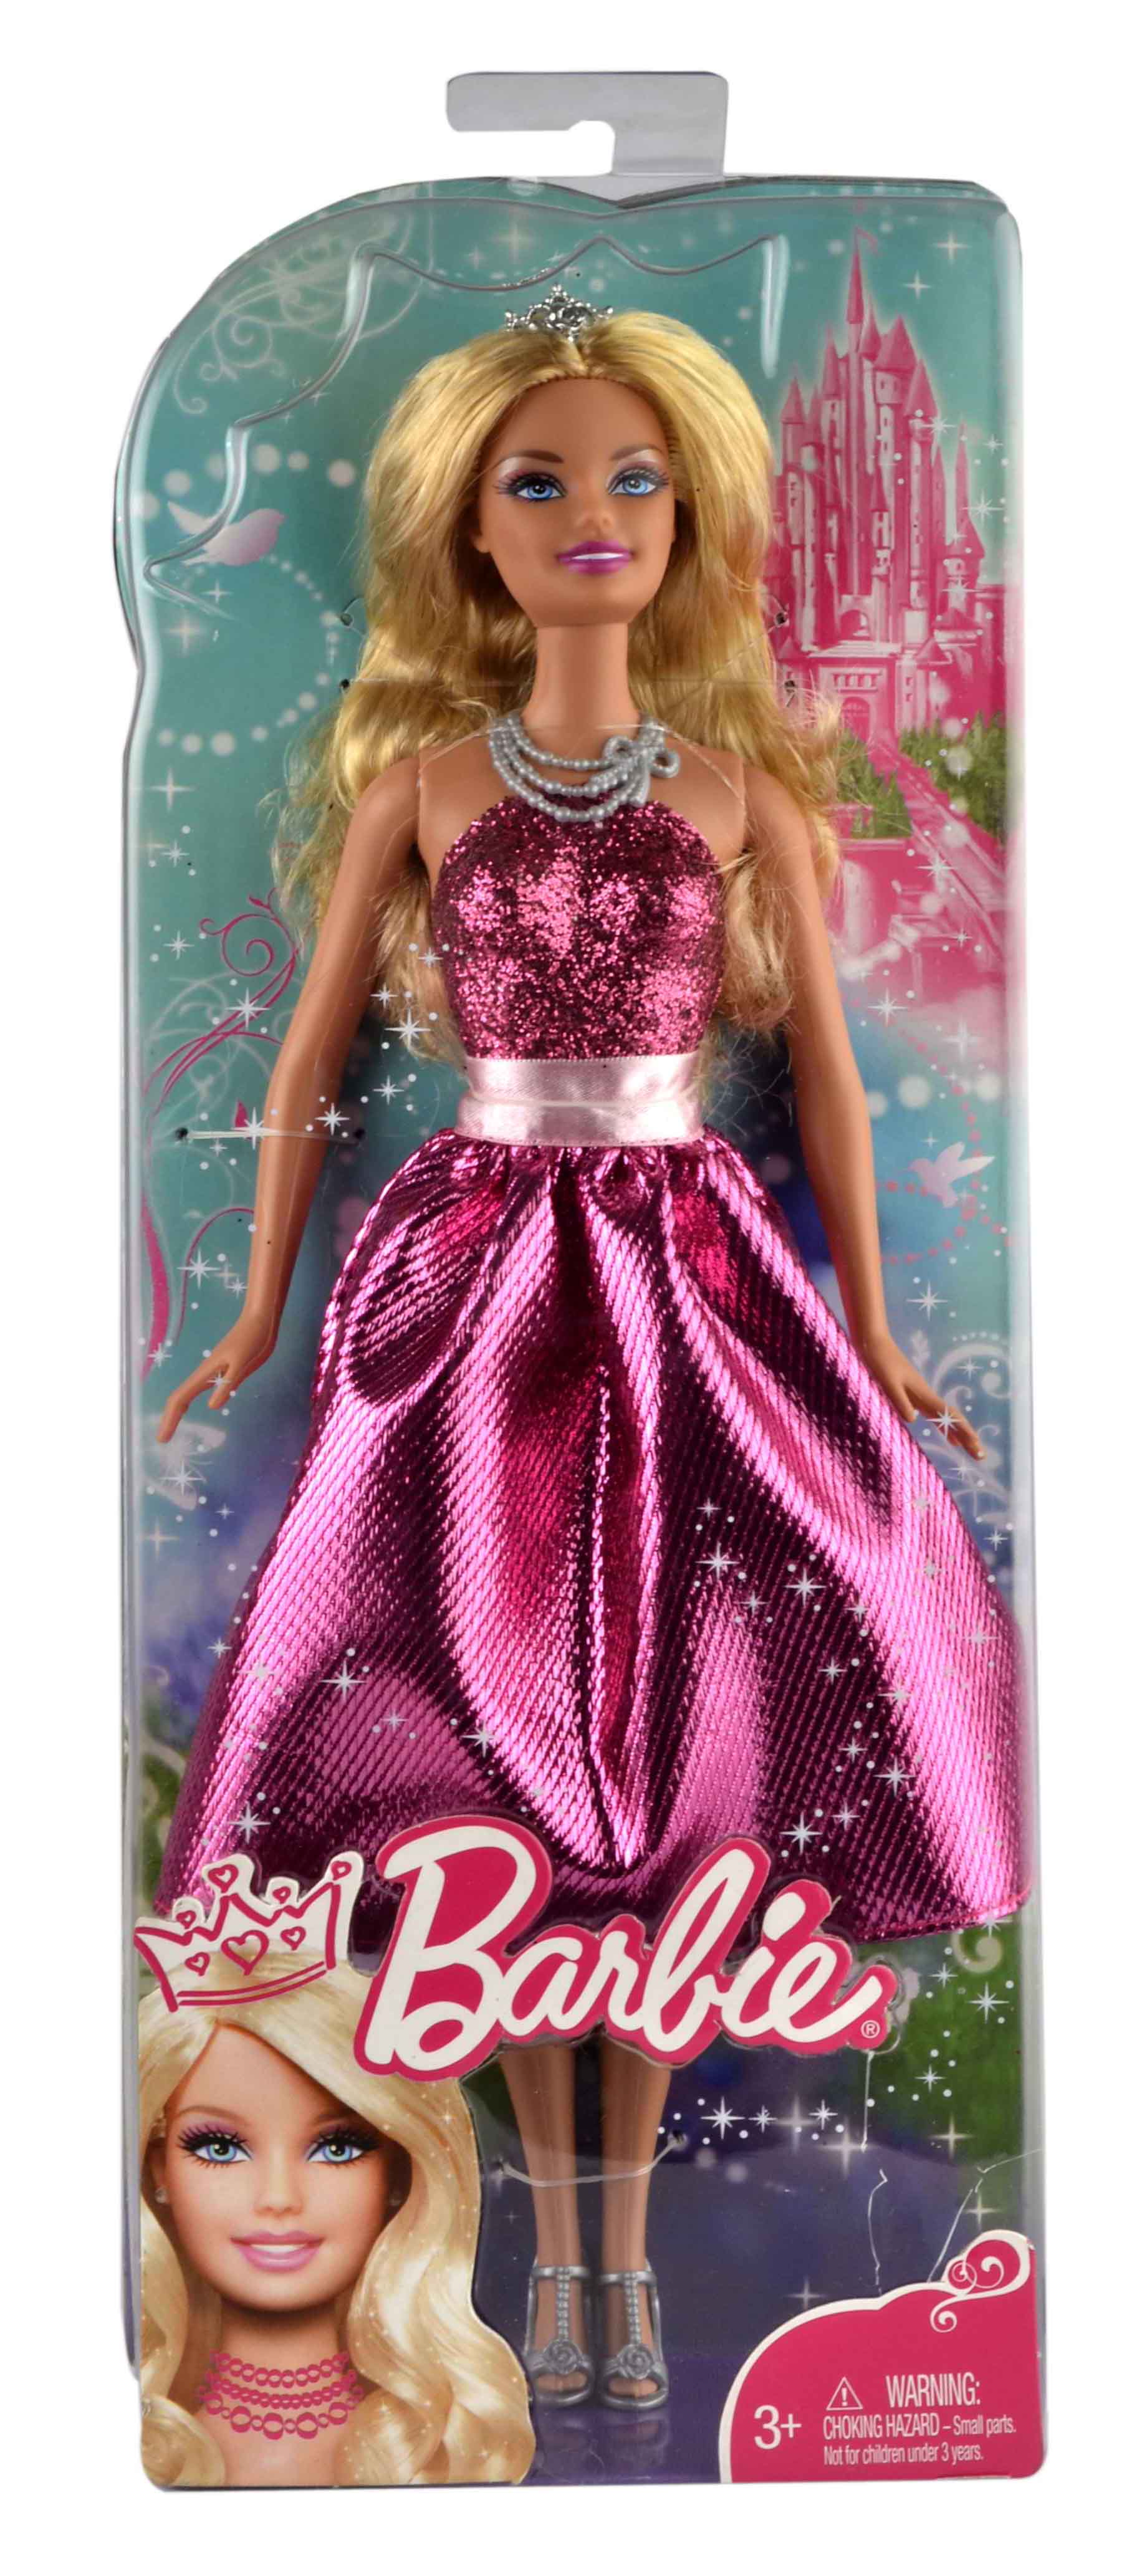 Barbie- Doll at Best Prices - Shopclues Online Shopping Store